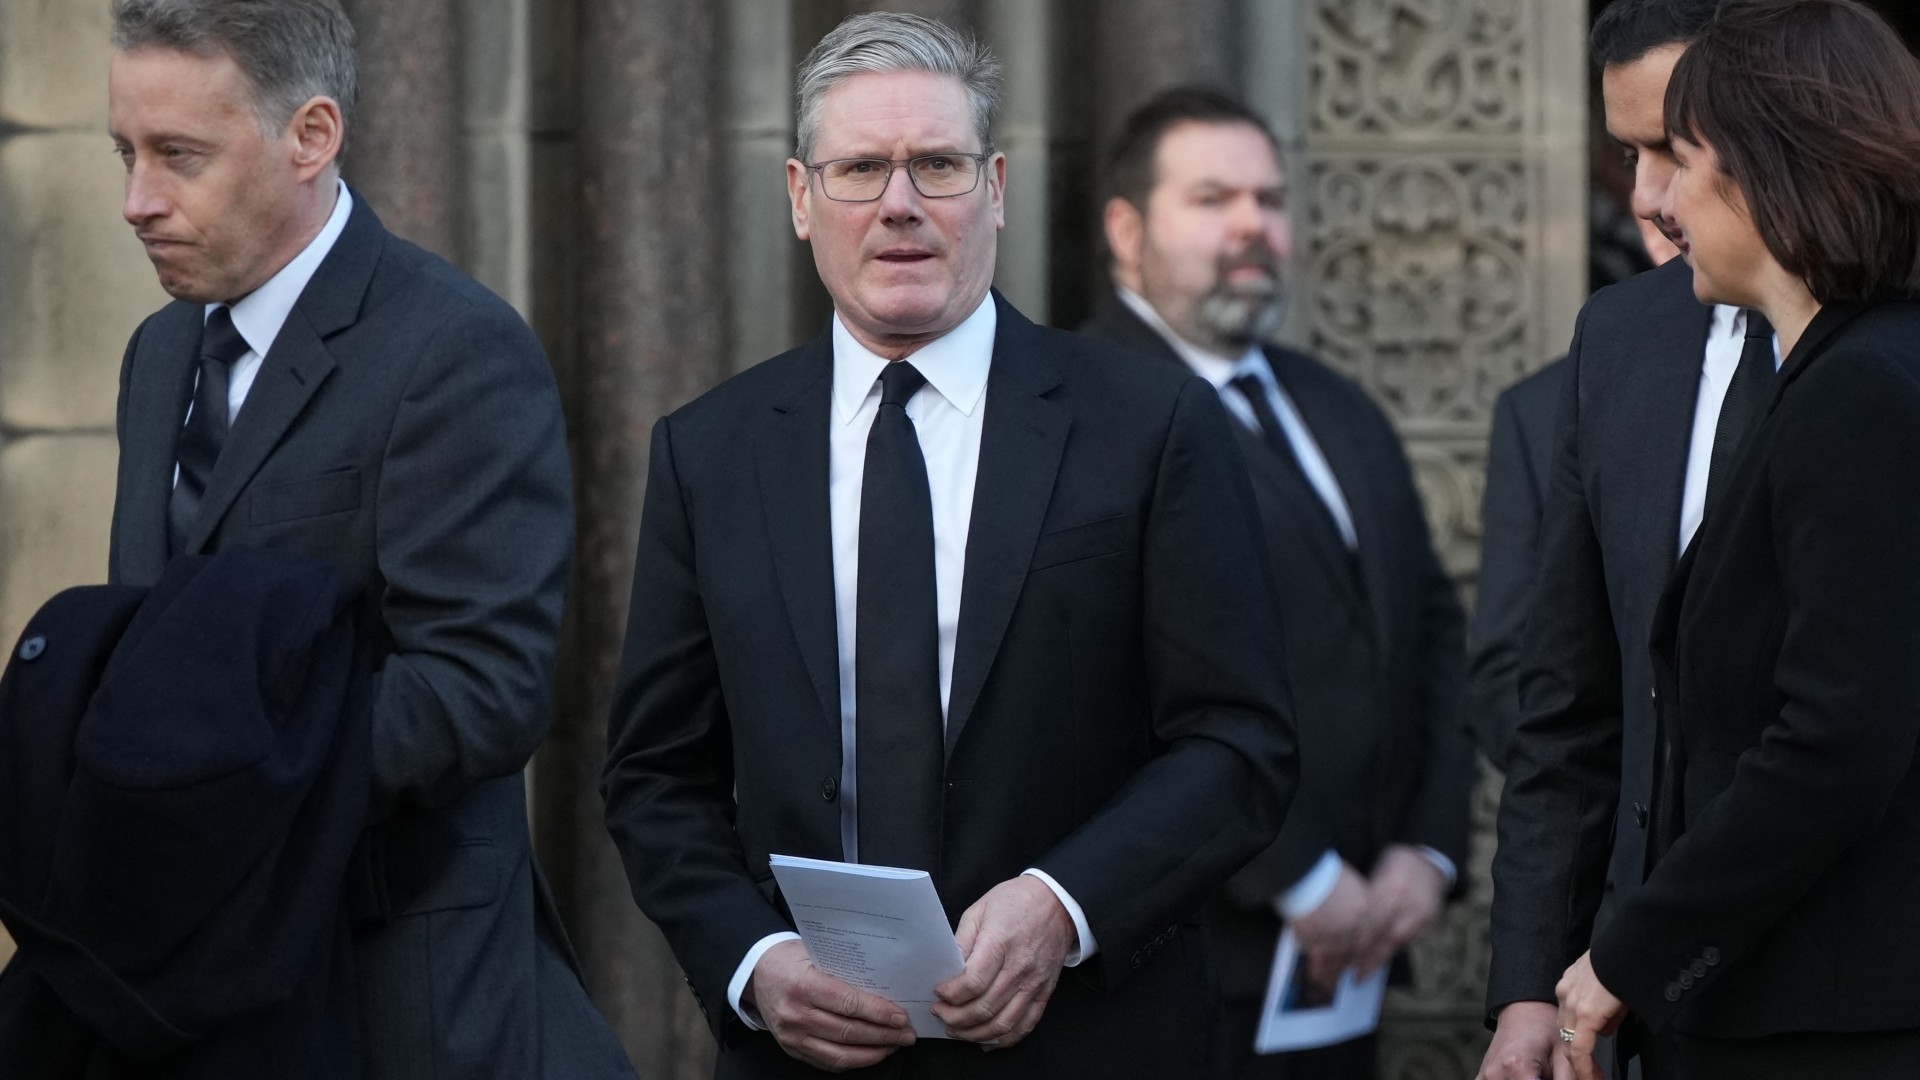 Britain's opposition Labour Party leader Keir Starmer leaves at the end of the funeral service of former British Chancellor of the Exchequer Alistair Darling at St Mary's Episcopal Cathedral in Edinburgh, Scotland on December 19, 2023. Alistair Darling served as a Labour MP between 1987 and 2015, first for Edinburgh Central and then for Edinburgh South West. He died, aged 70, in November.